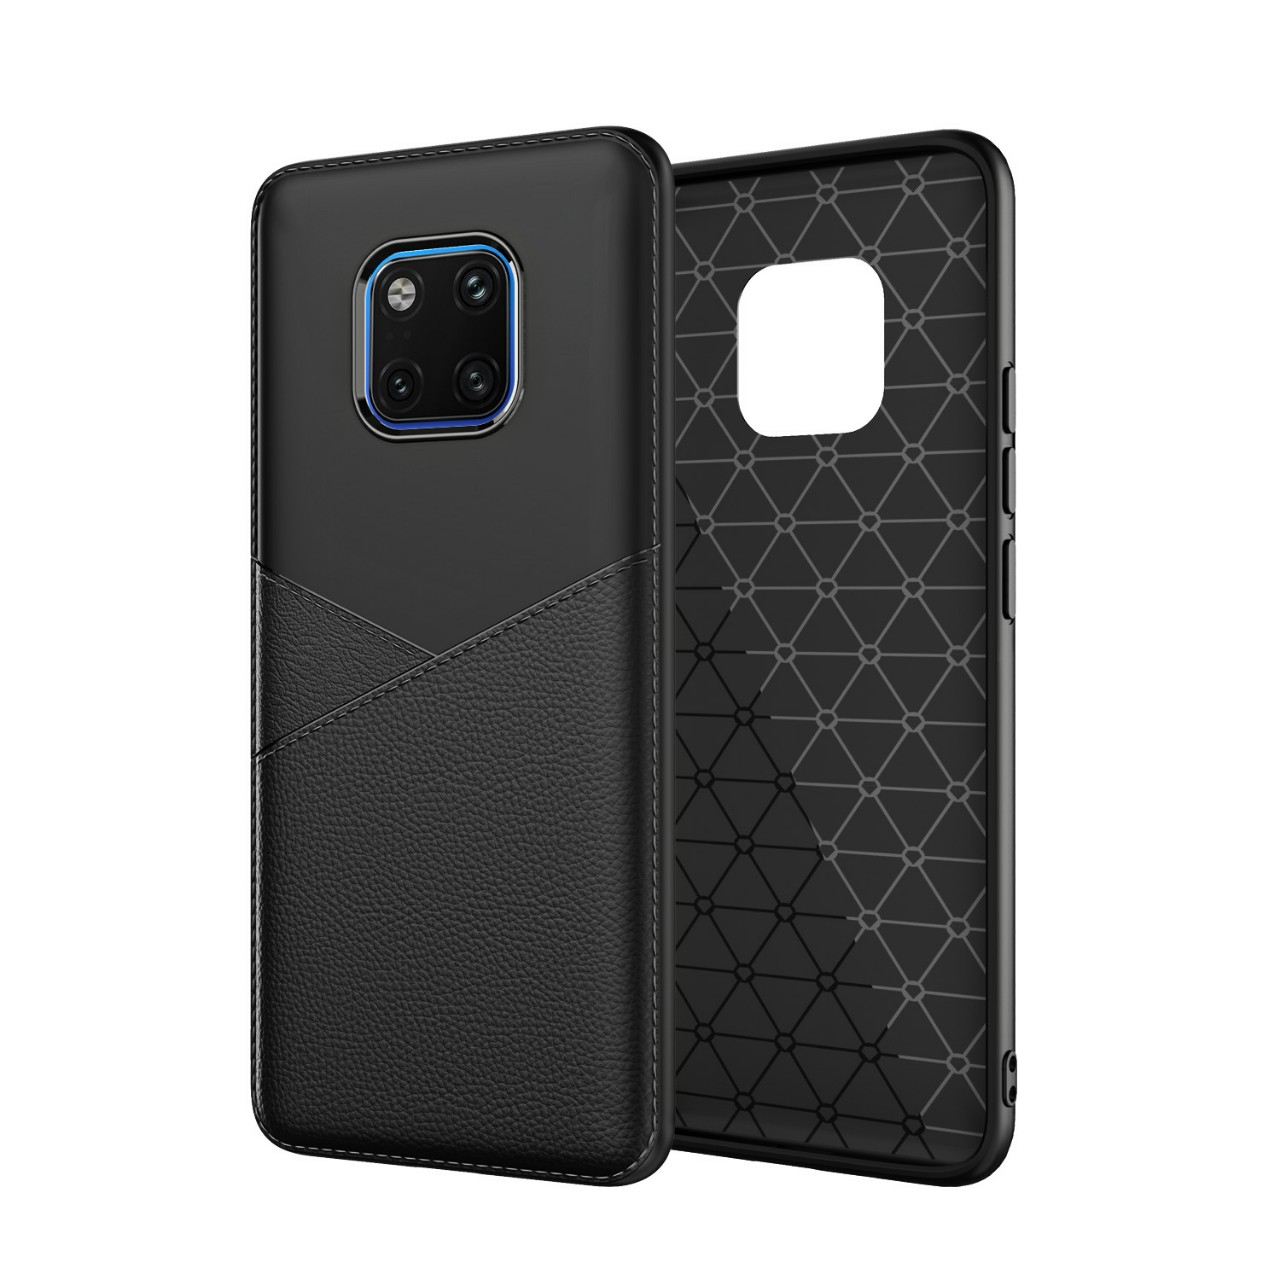 NORDIC LEATHER EFFECT BACK CASE FOR HUAWEI MATE 20 - BLACK